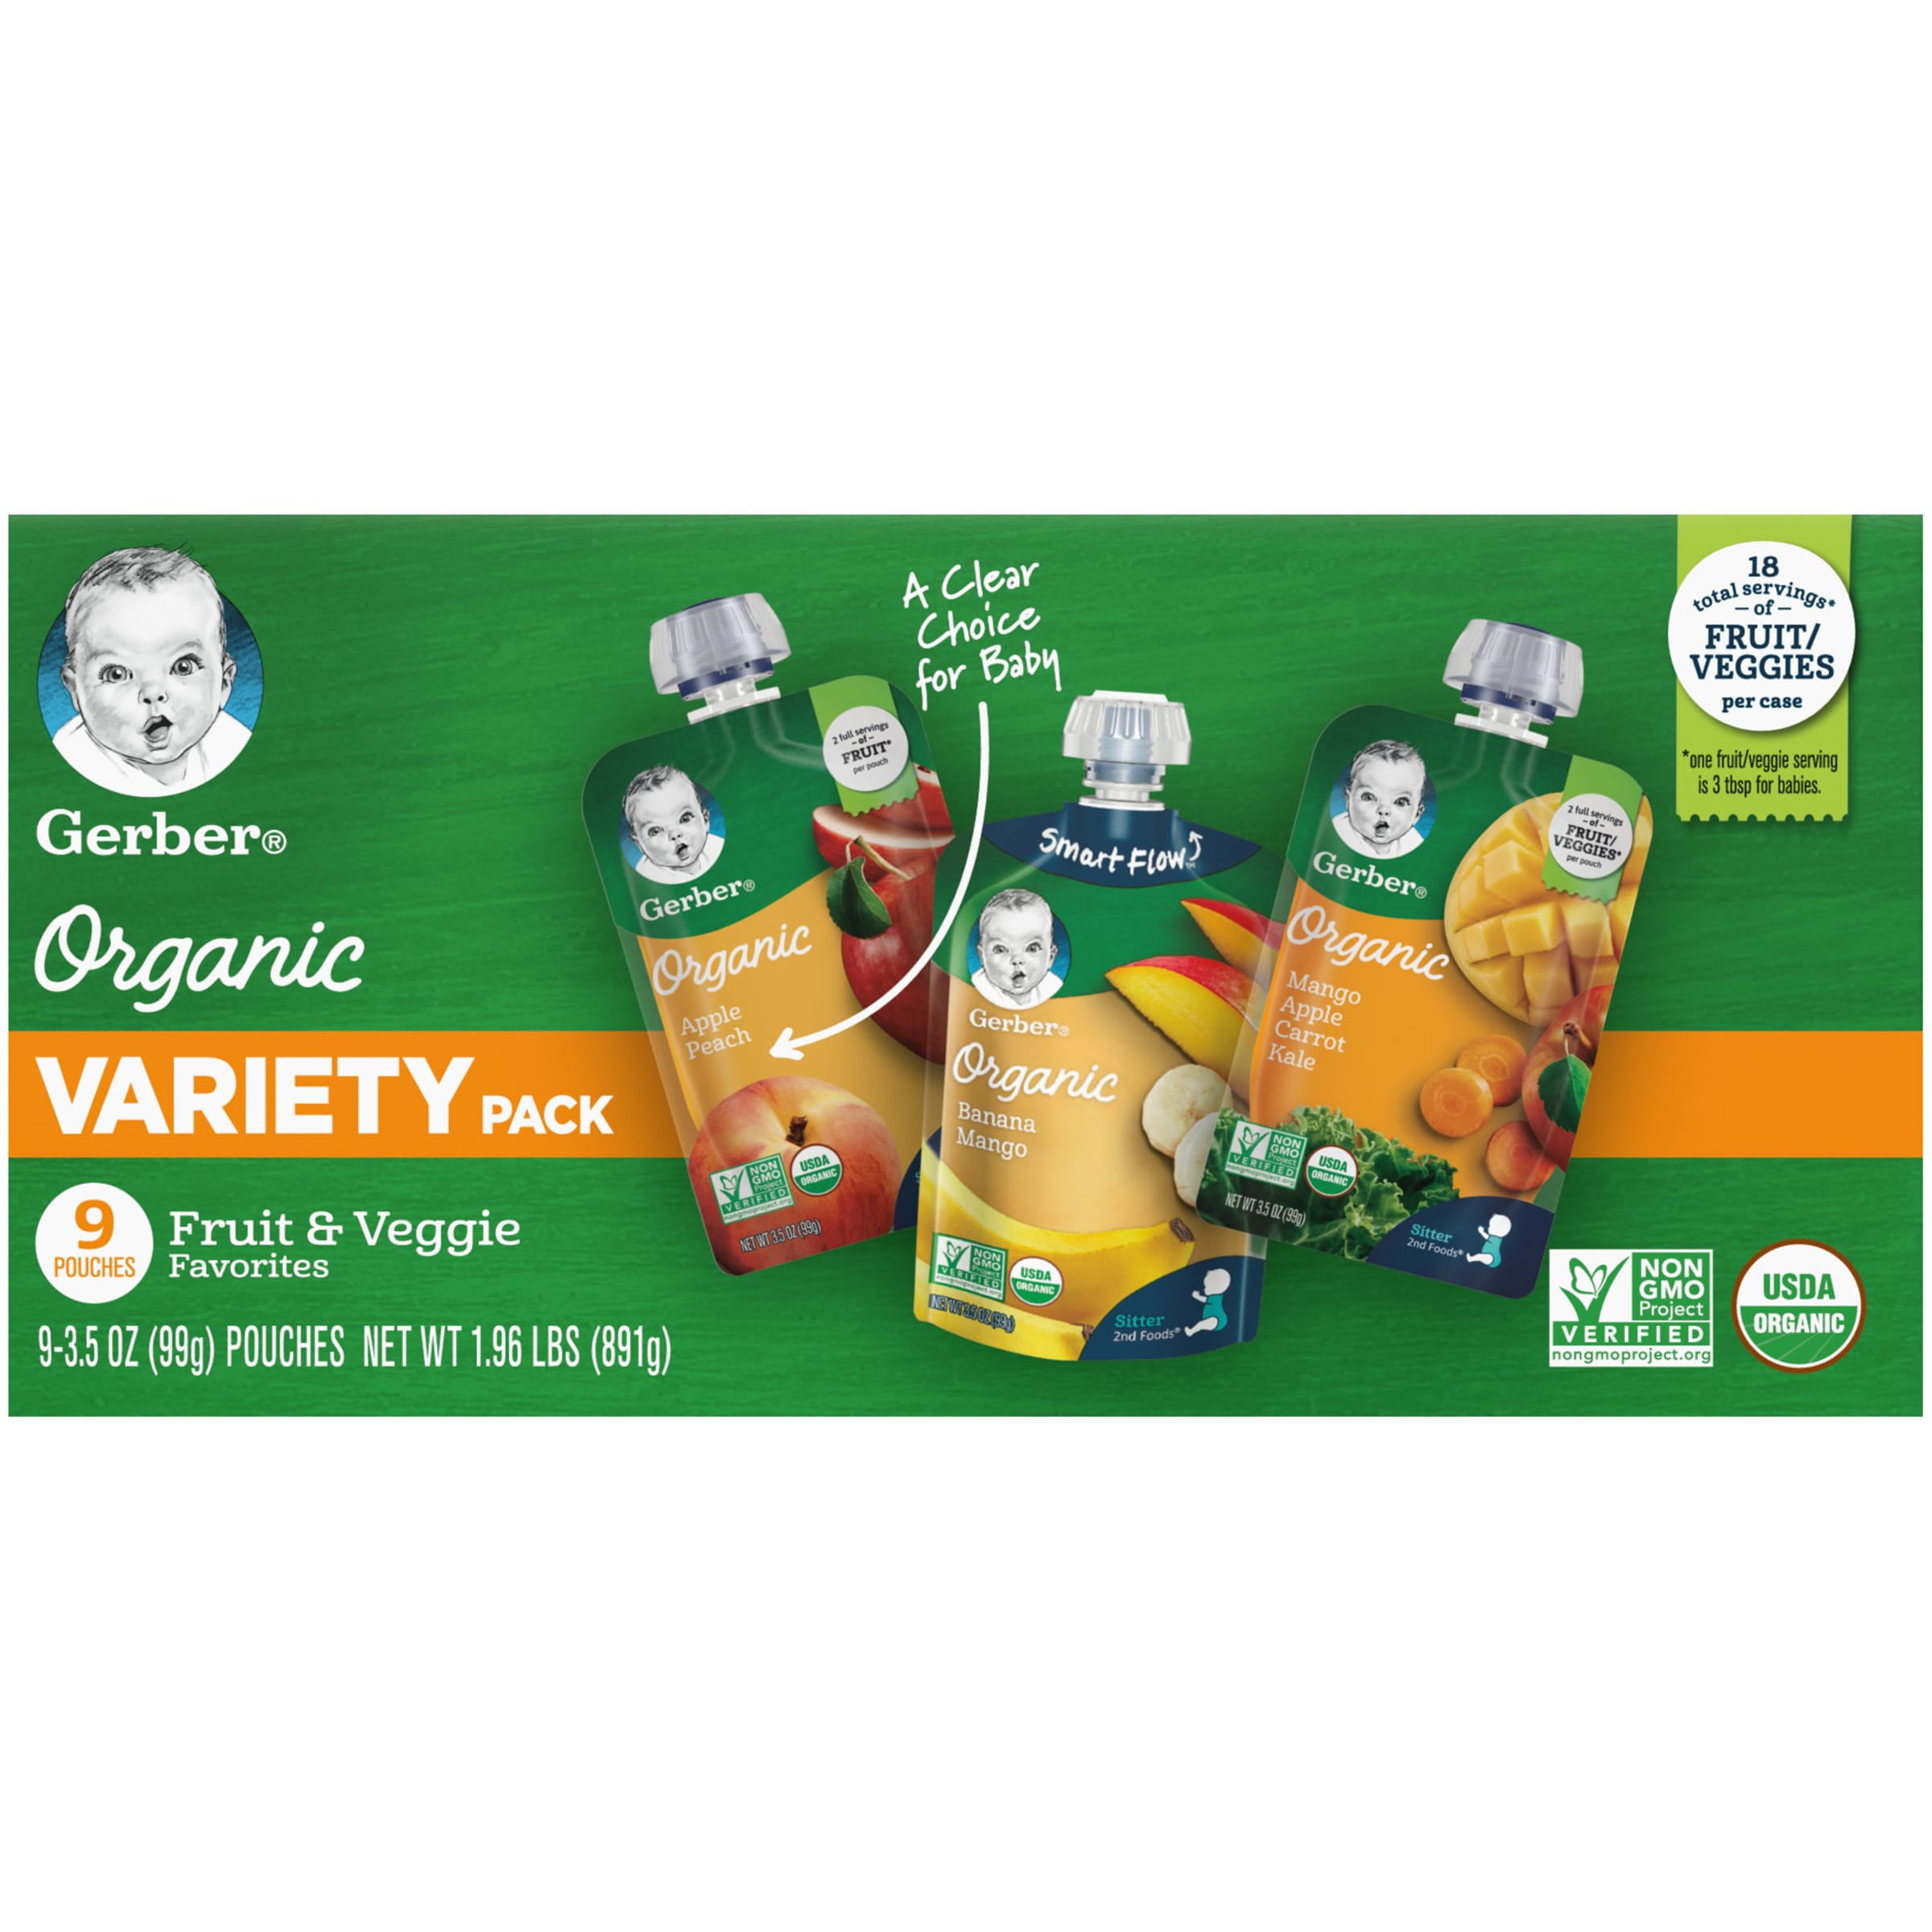 Gerber 2nd Foods Organic for Baby Fruit & Veggie Favorites, Variety Pack, 3.5 oz Pouch (9 Pack)